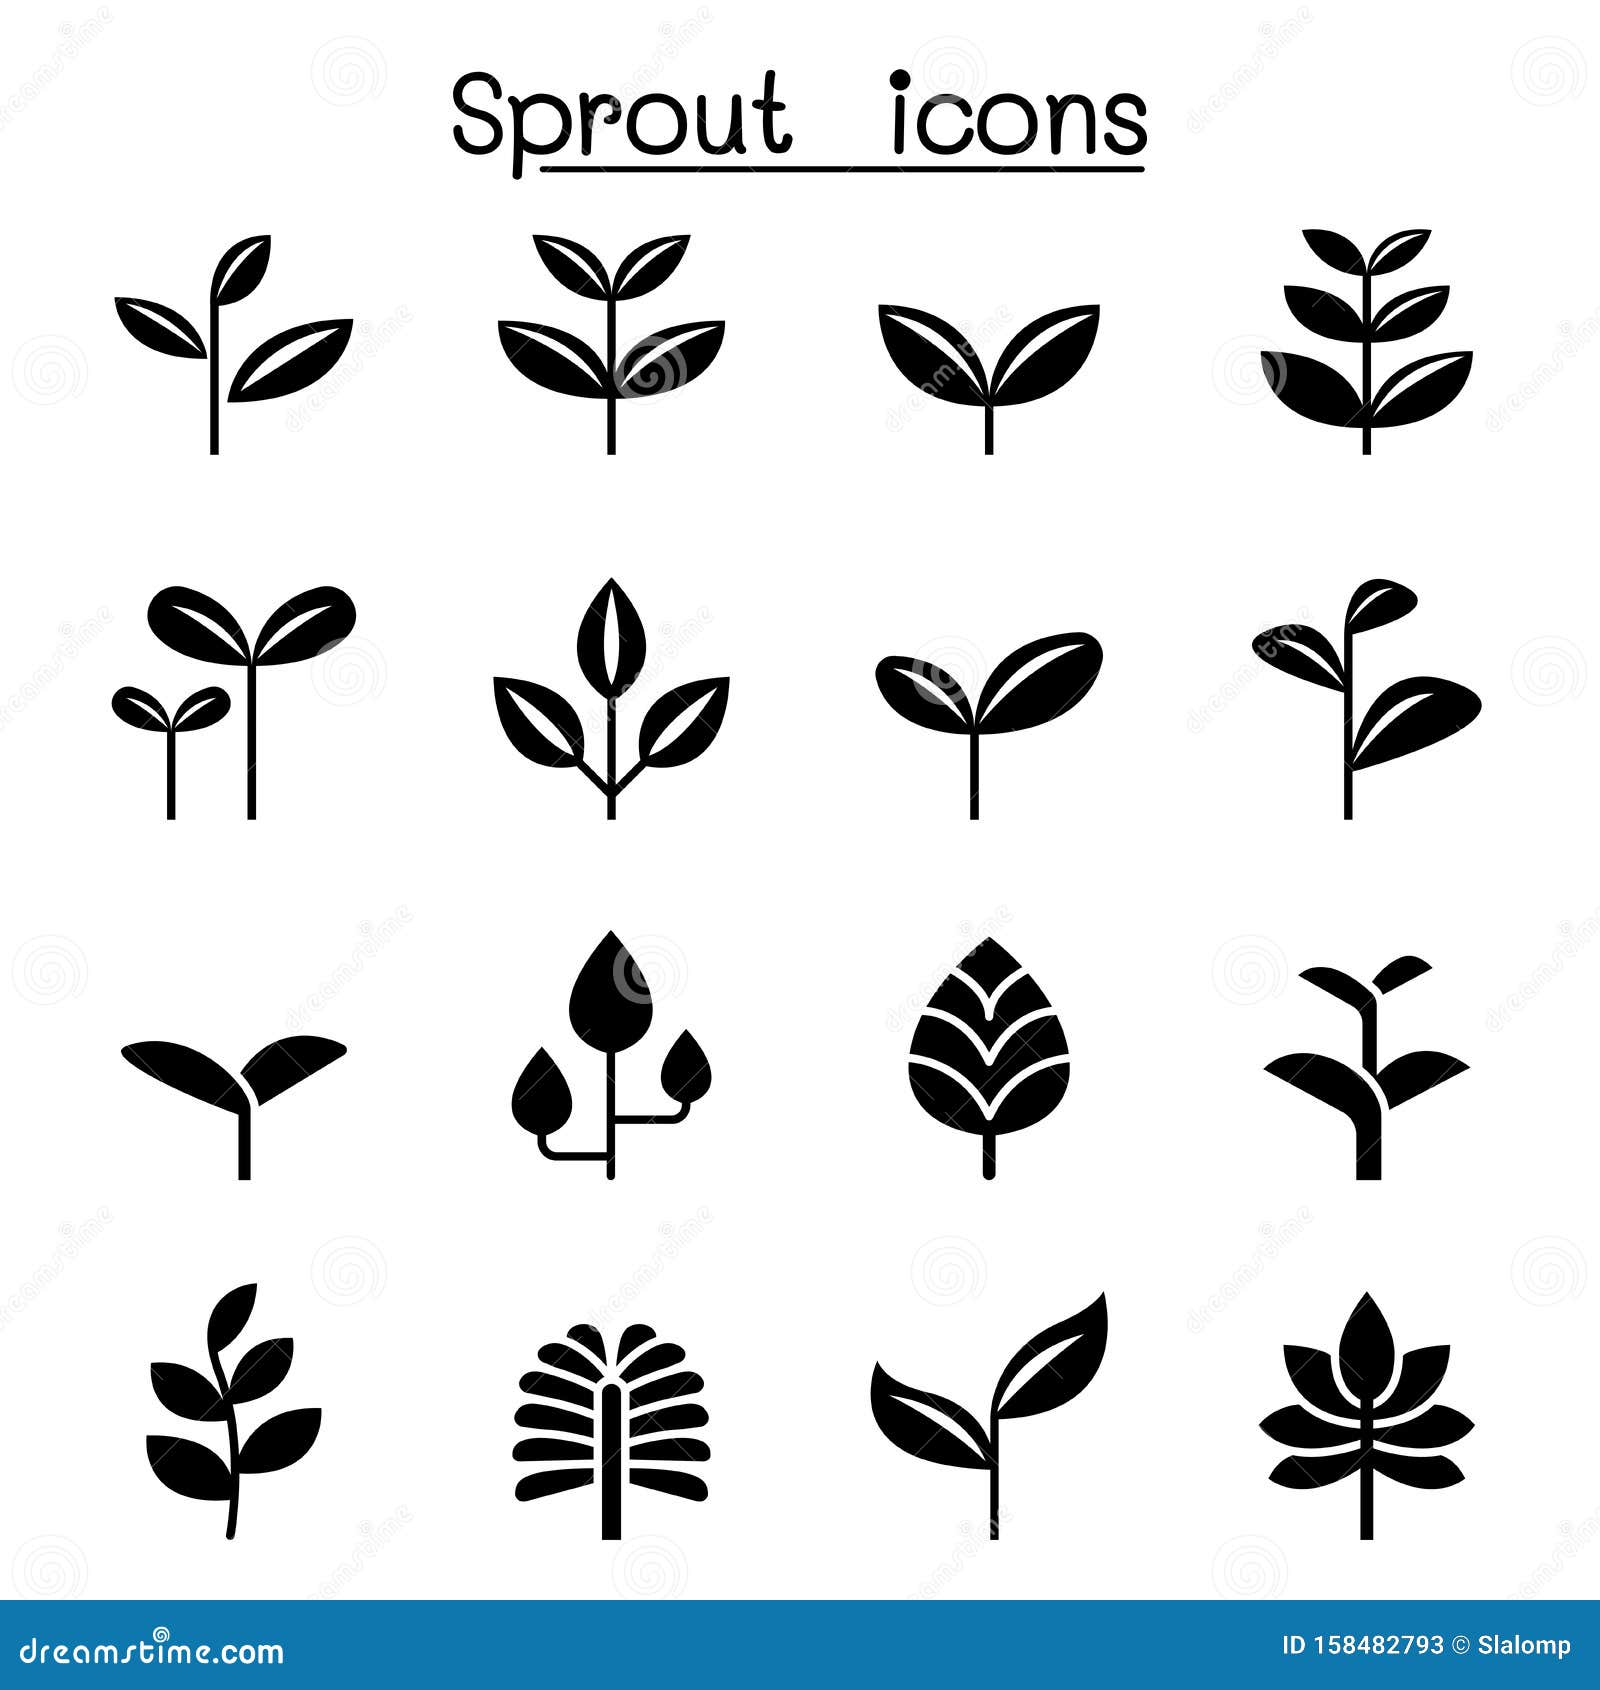 sprout, plant, treetop, leaf icon set   graphic 